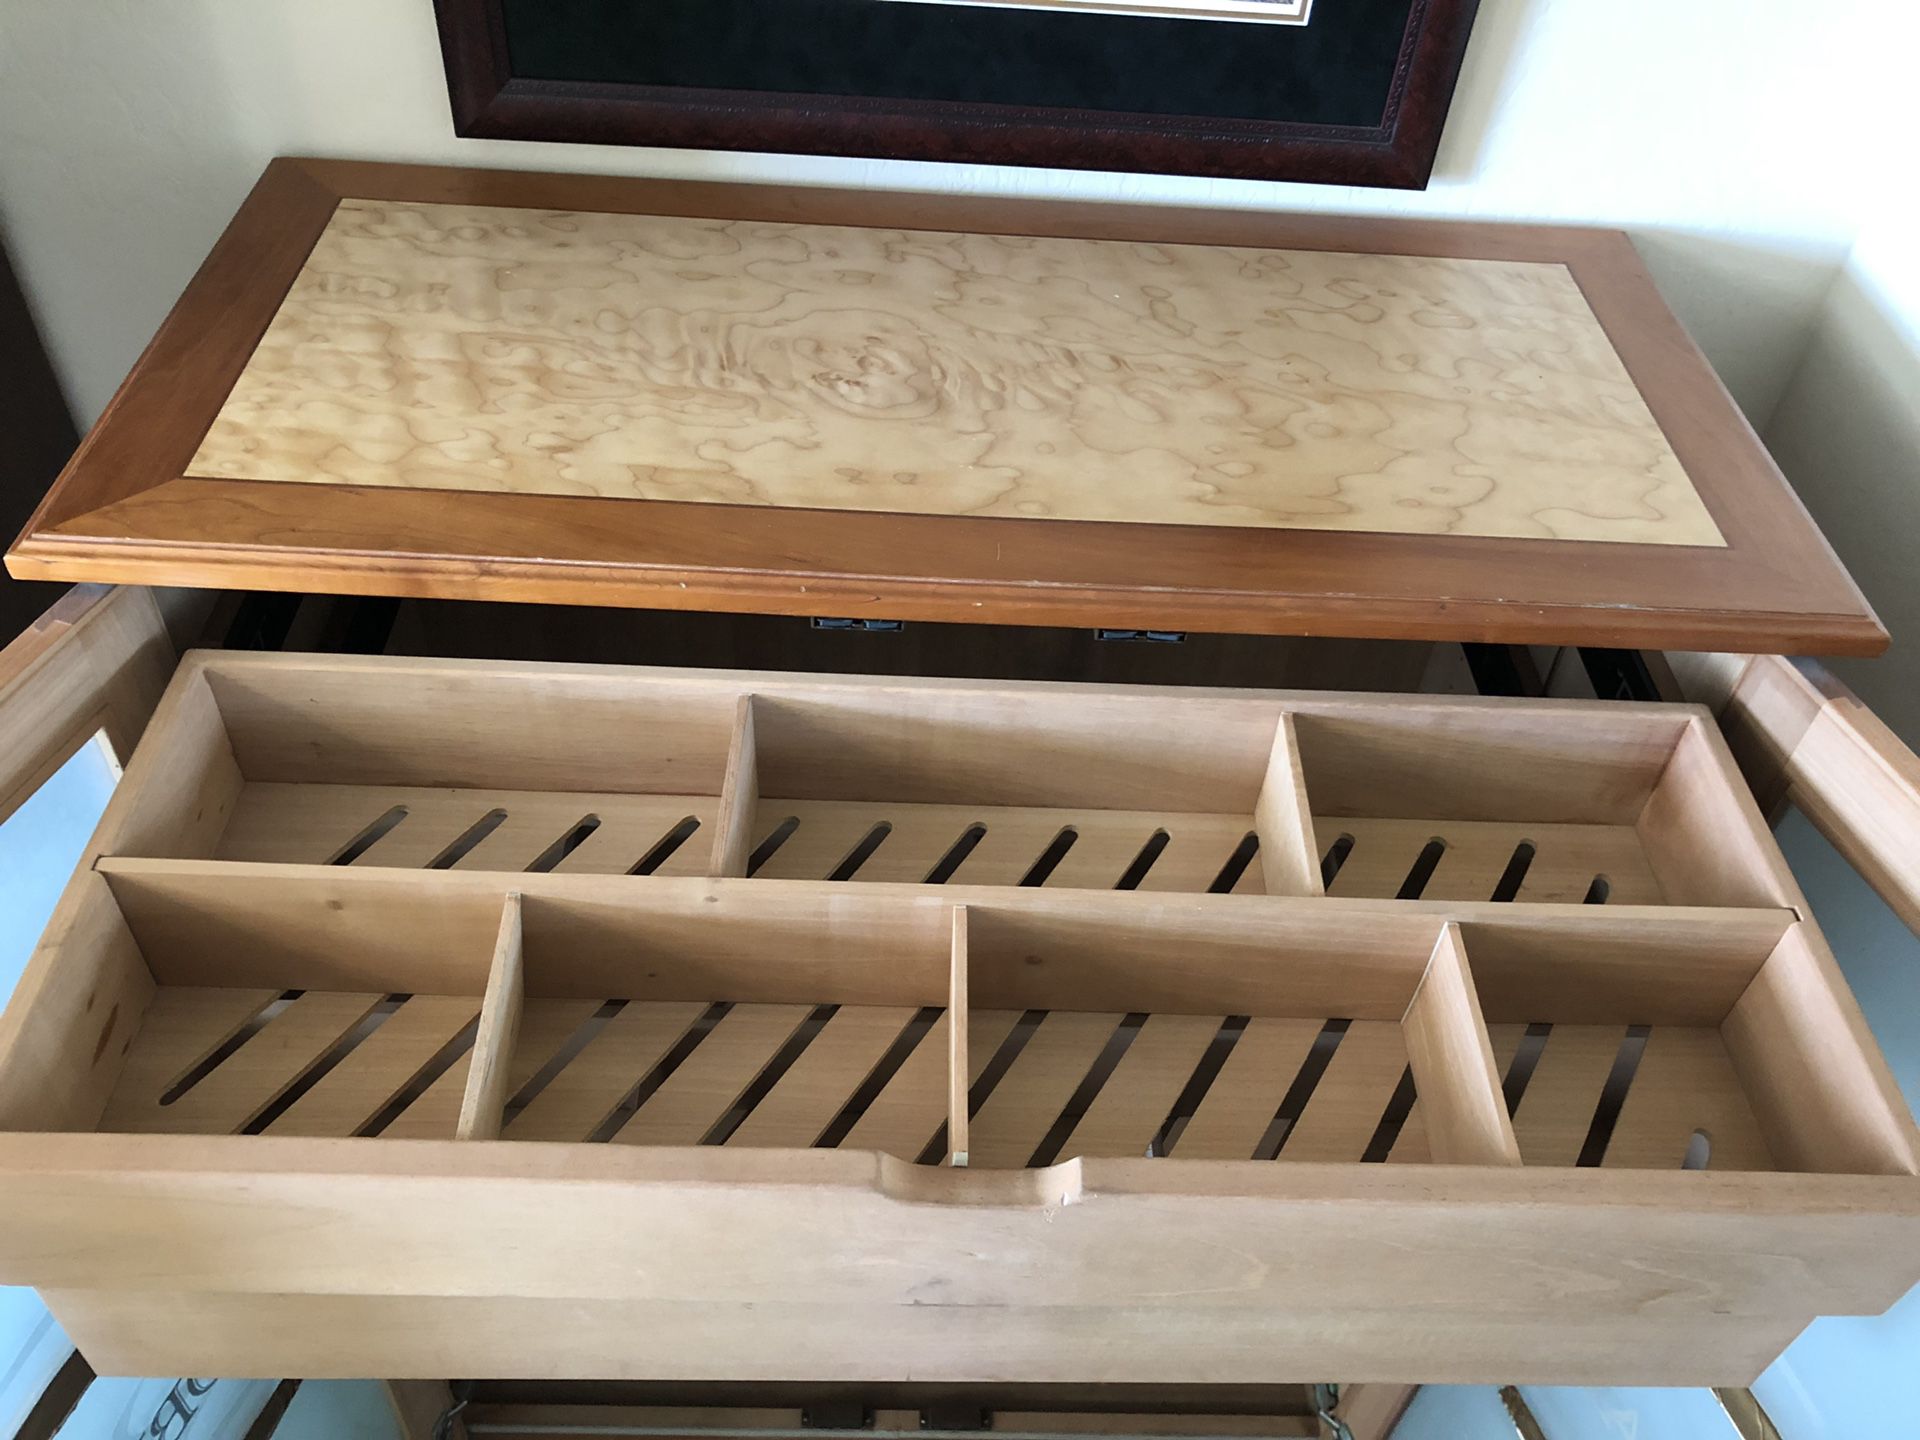 Aristocrat M Crown Cabinet Humidor for Sale - OfferUp